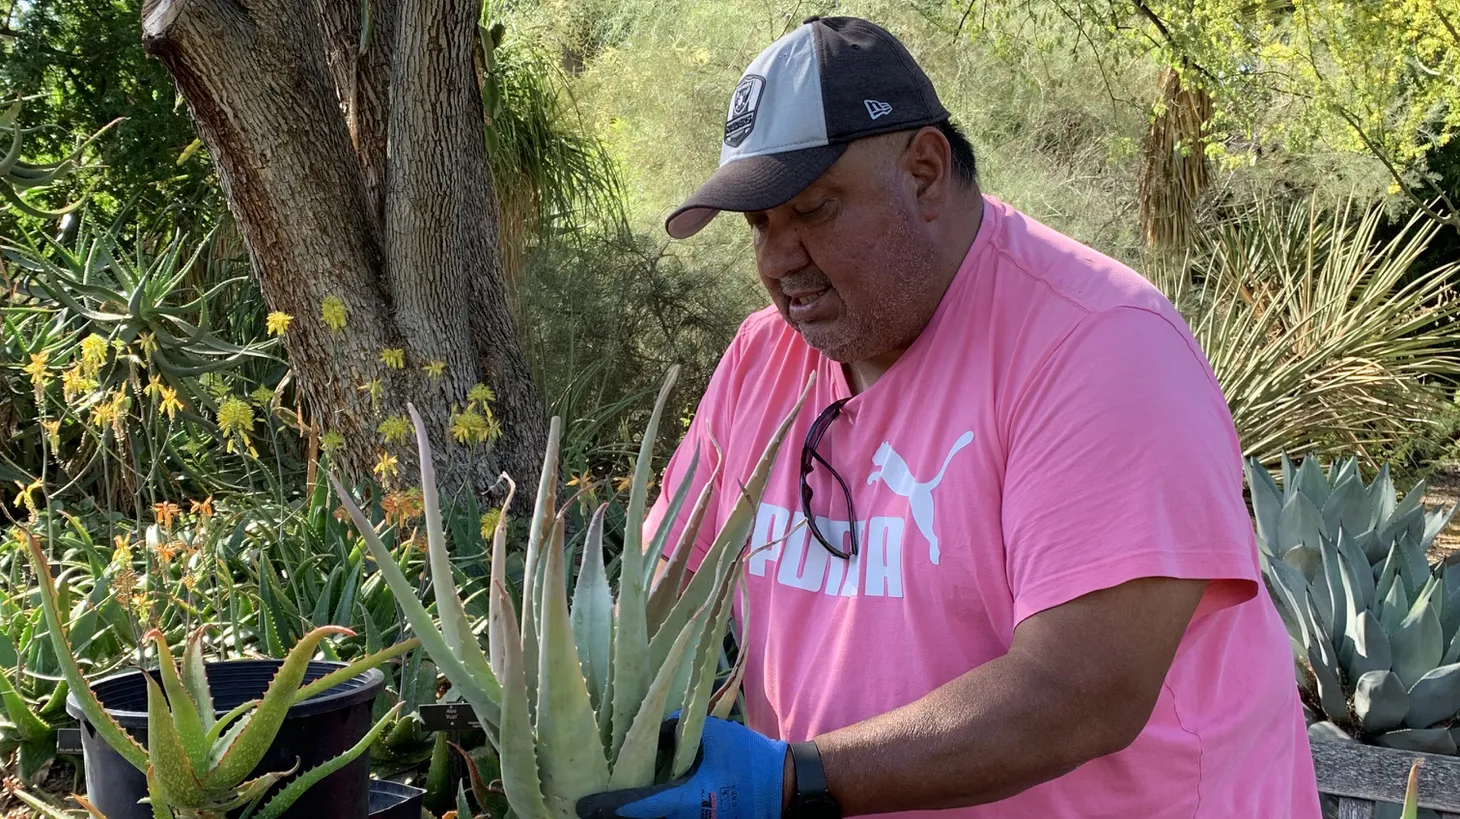 “Even though many people may think very little of being a gardener, it’s not like I’m an architect or one that flies to the moon. I feel pride in what I do,” says gardener Faustino Benites.